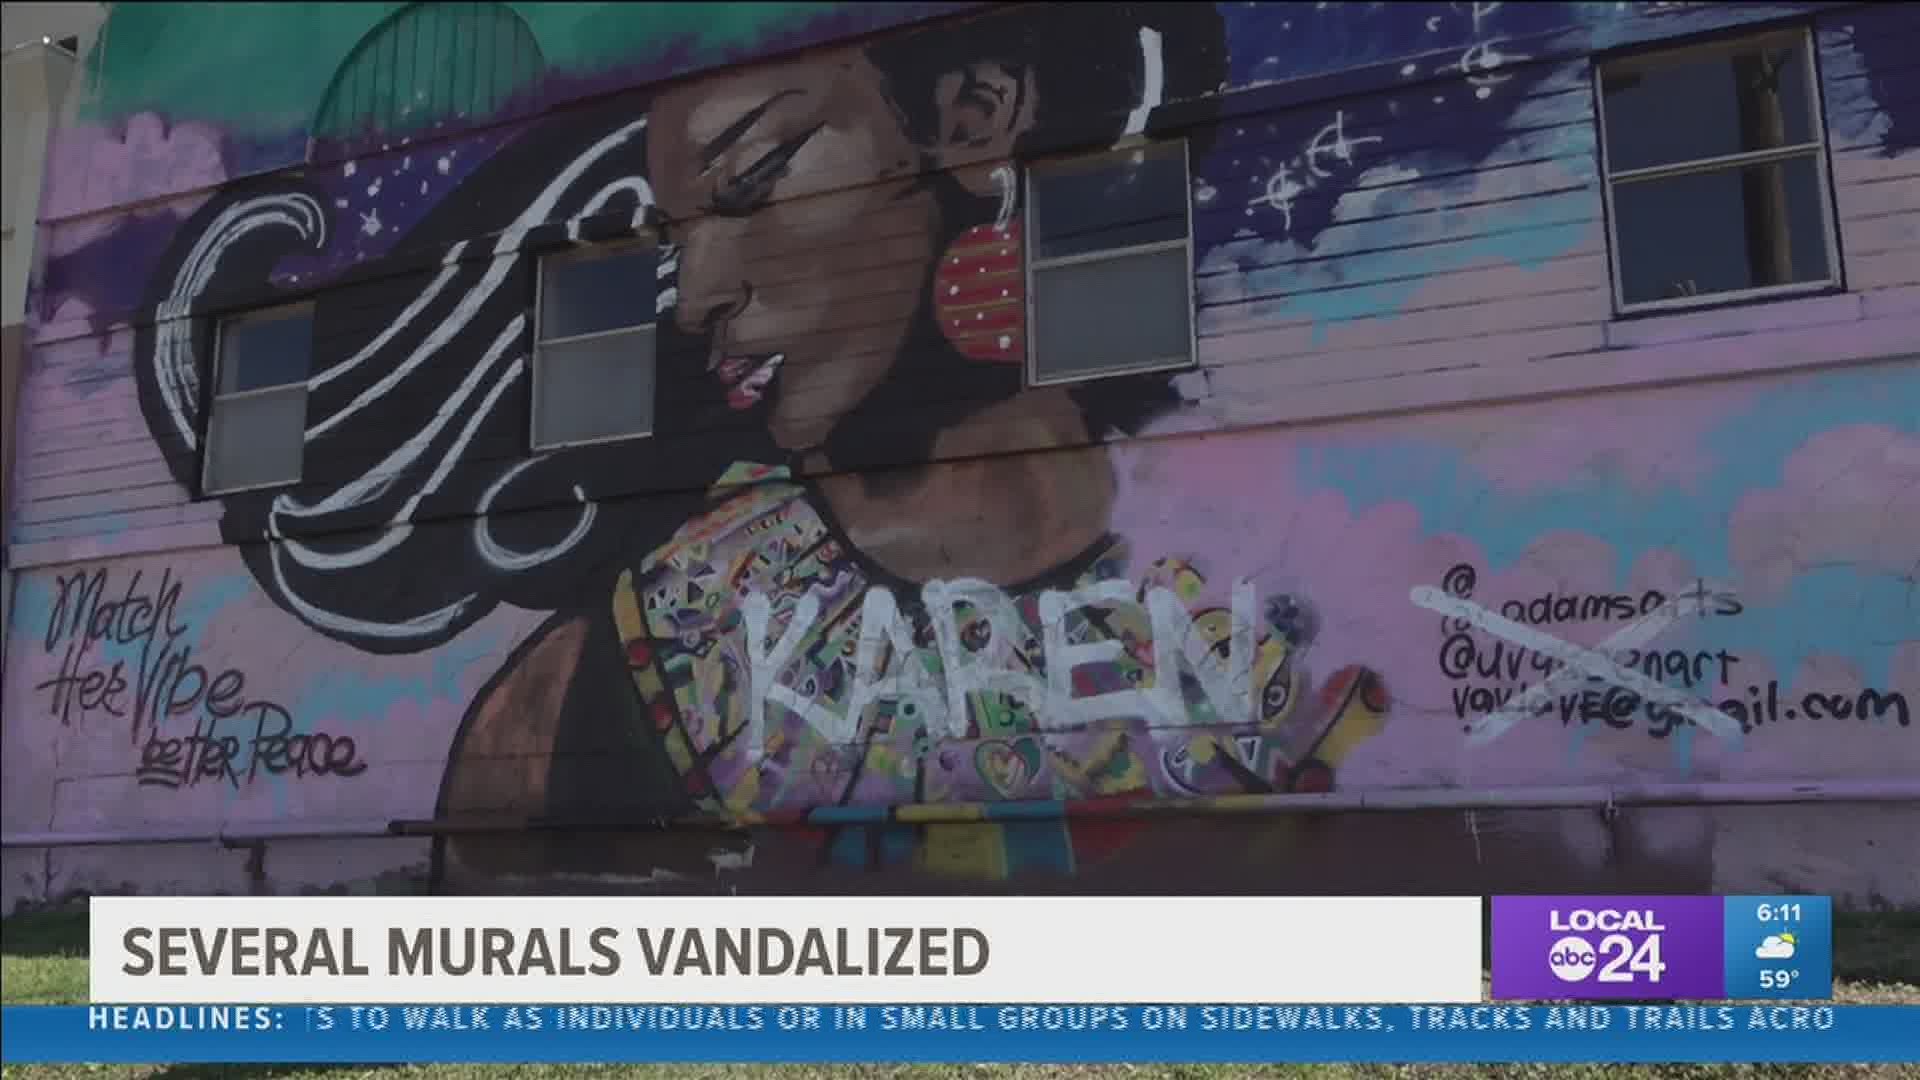 "Karen" was spray painted on the murals at Front and Second Streets.